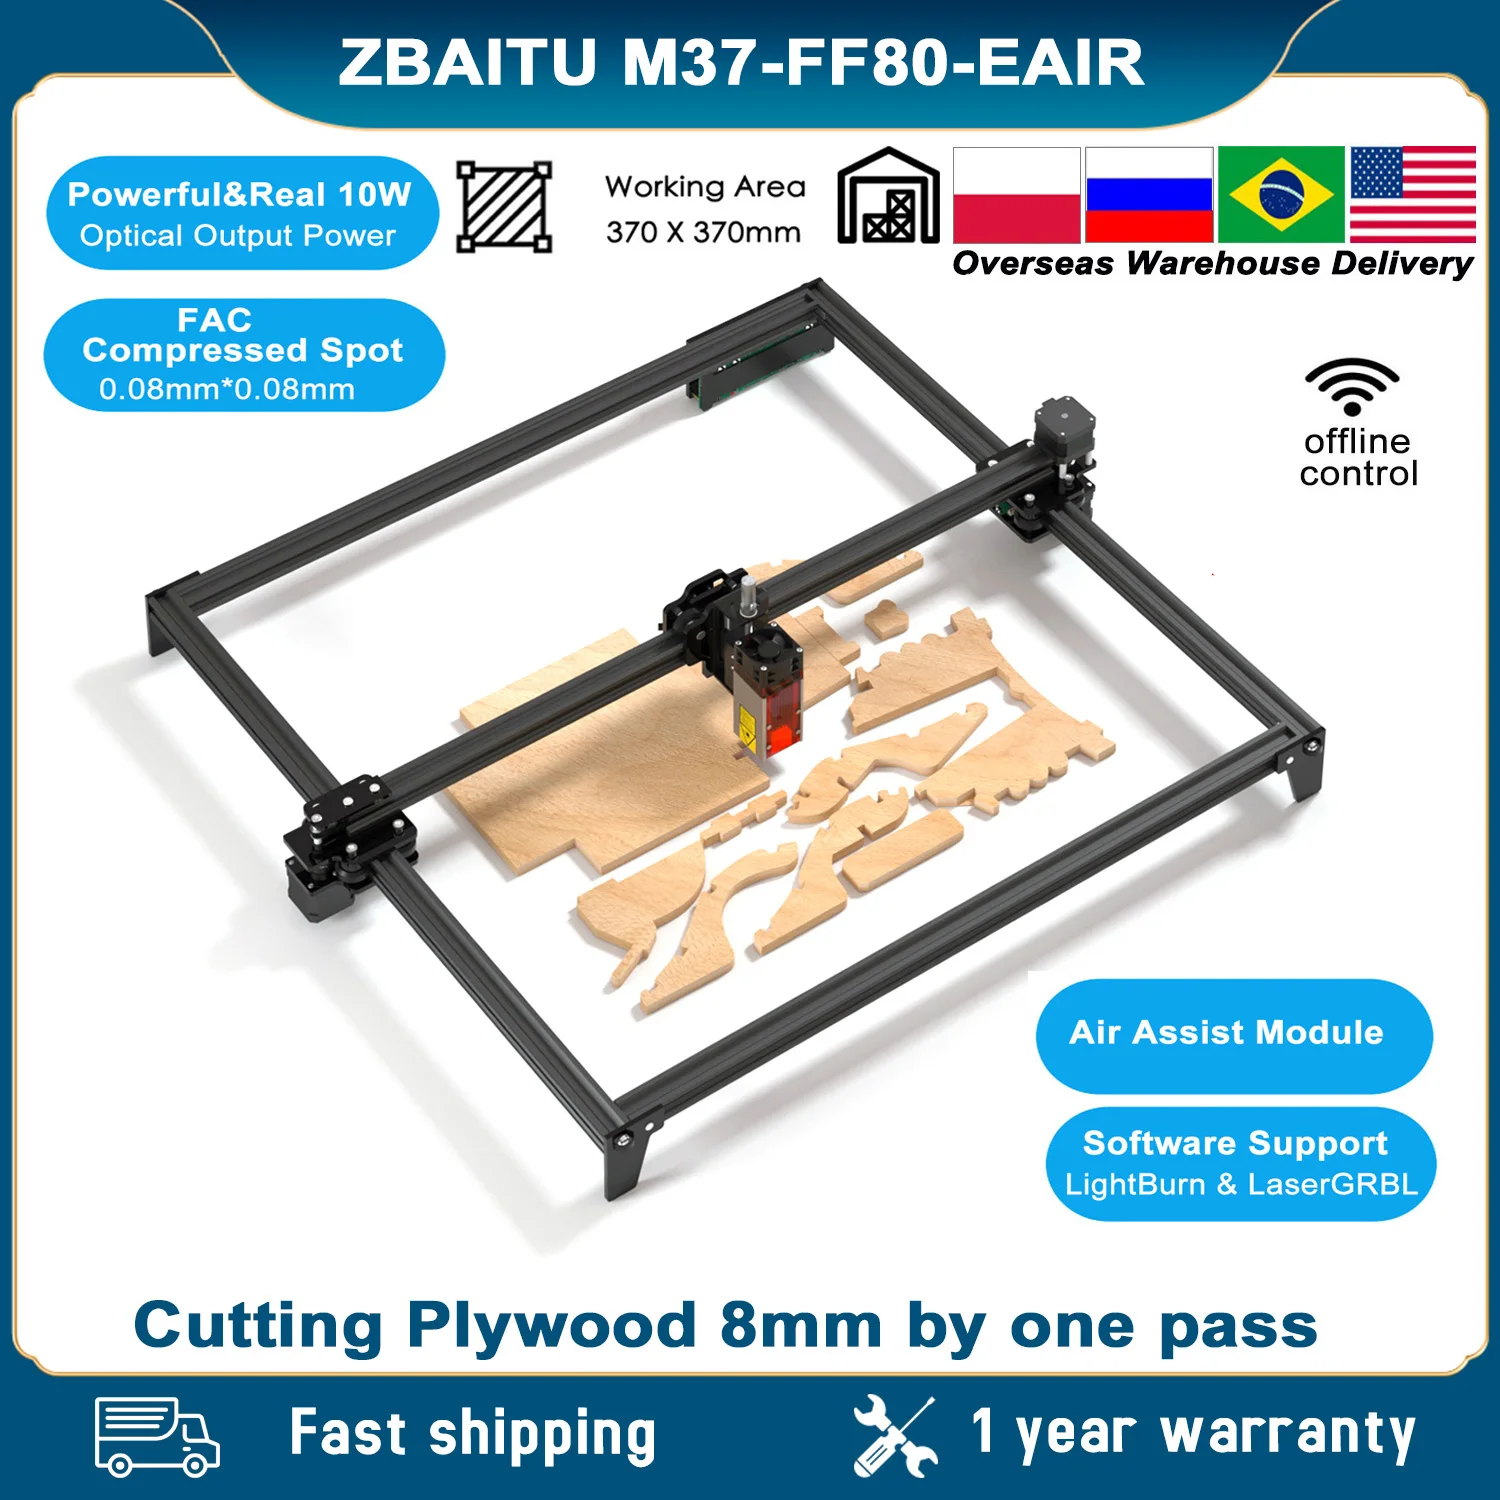 ZBAITU 80W Laser Engraver 10W Output CNC Laser Cutter 370*370mm 3D Wood Router Engraving and Cutting Machine RU/PL/US Warehouse